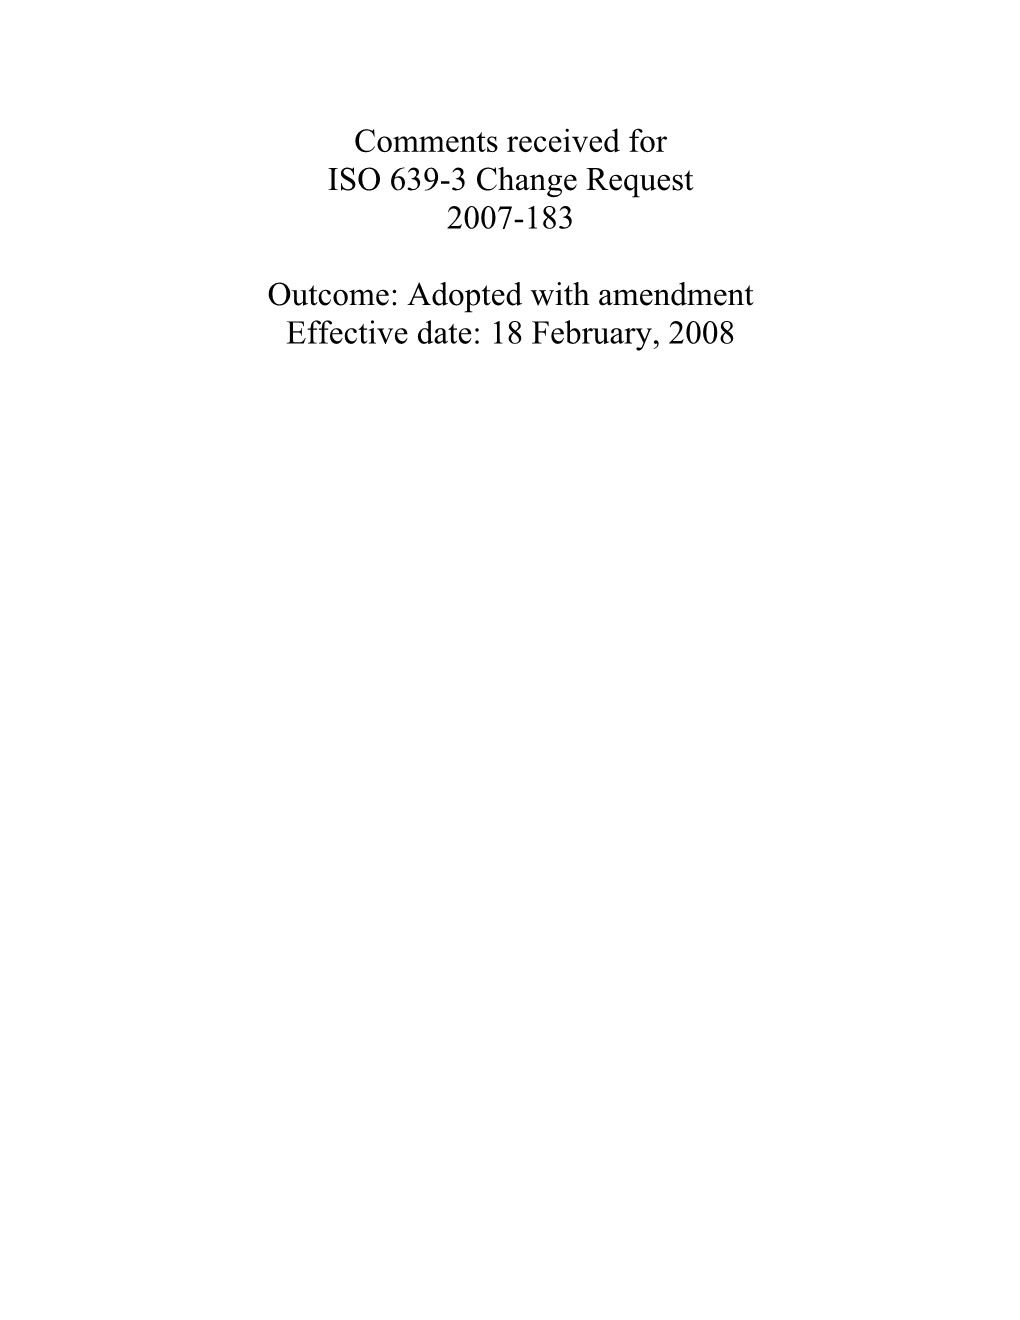 Comments Received for ISO 639-3 Change Request 2007-183